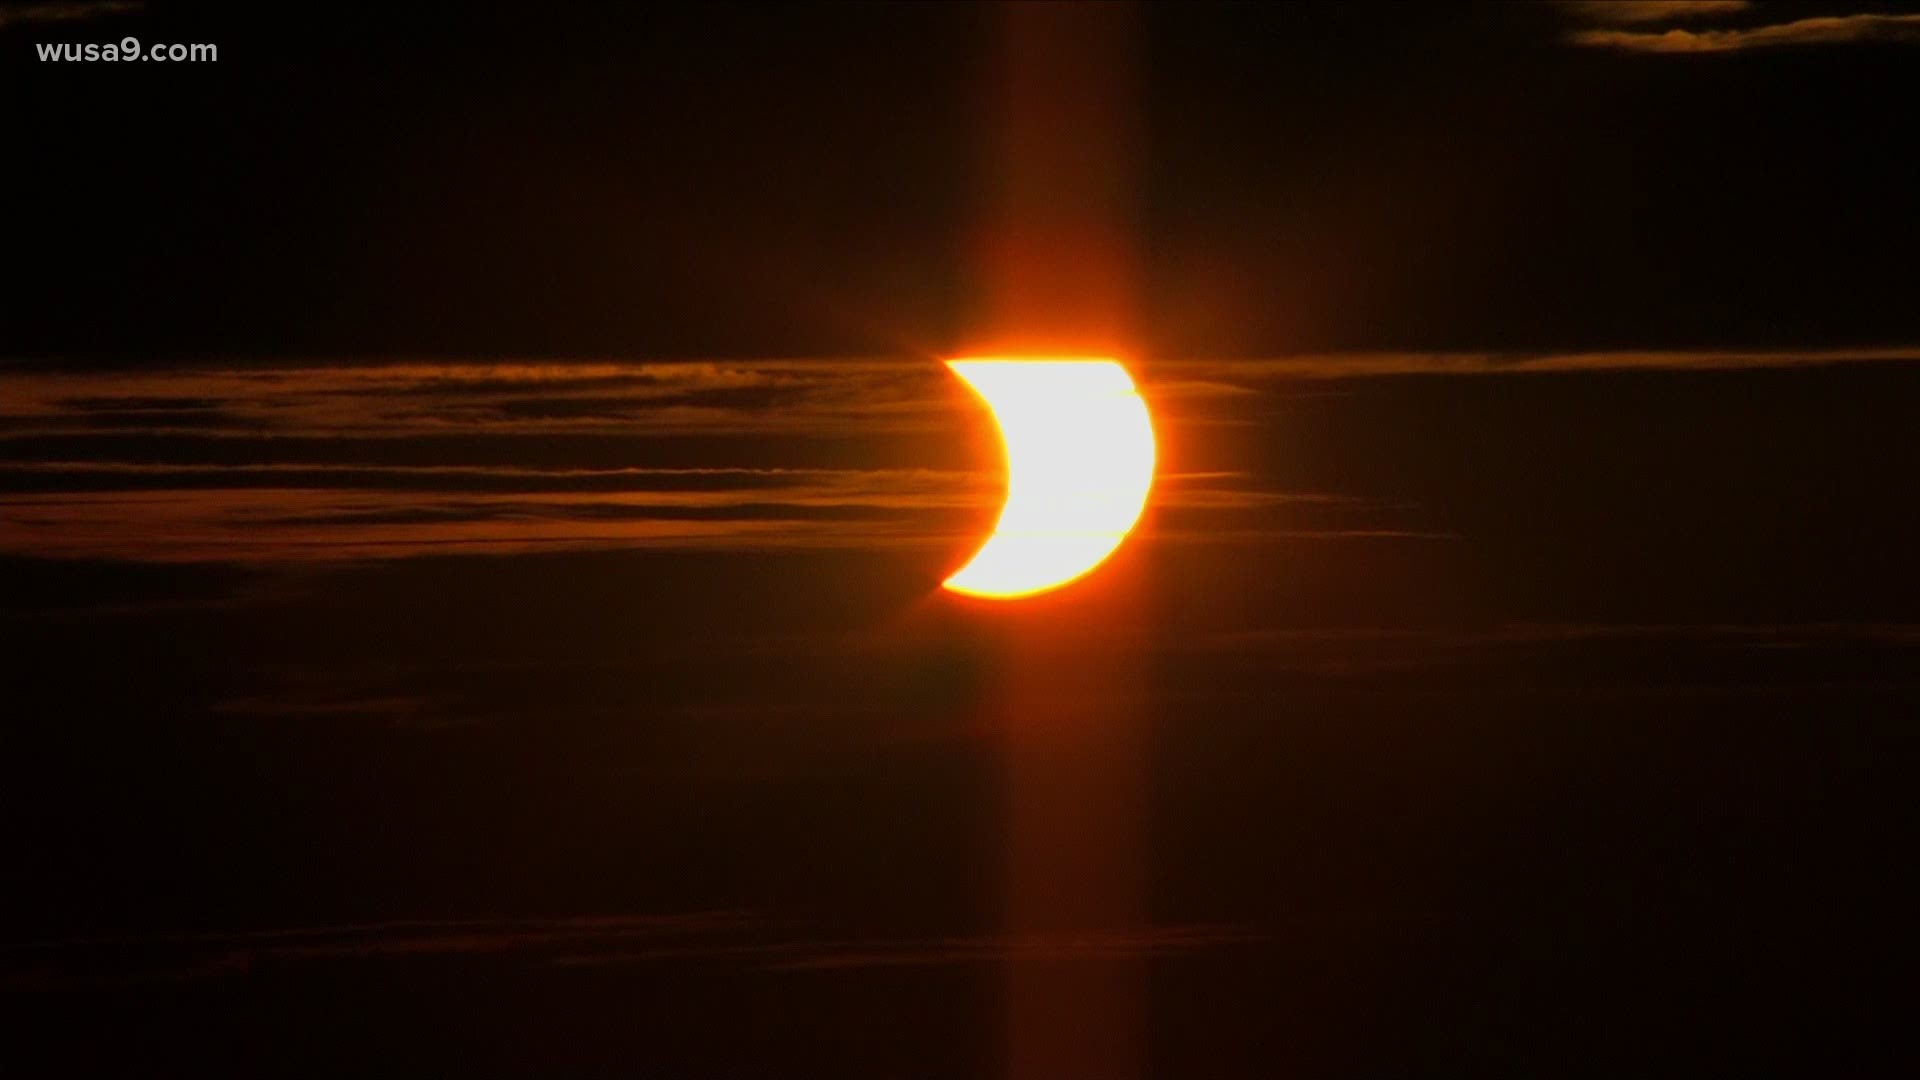 Here's a look at a brief view of a partial solar eclipse in the D.C. region Thursday morning.